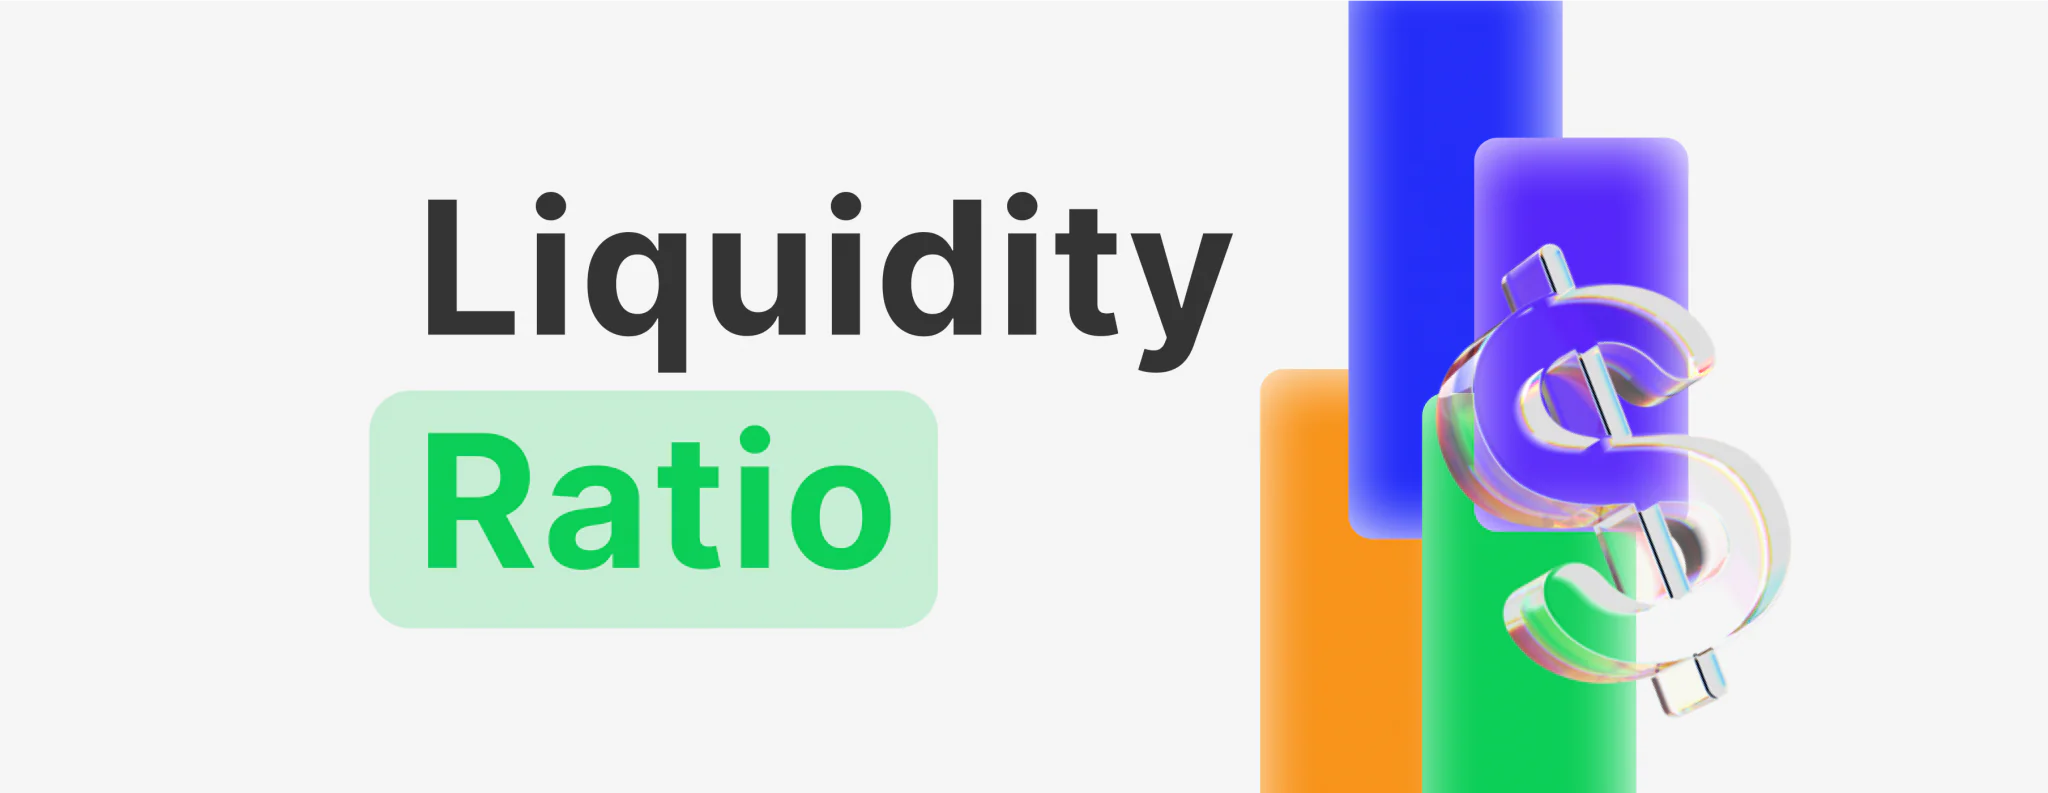 Understanding Liquidity Ratio And Its Importance For